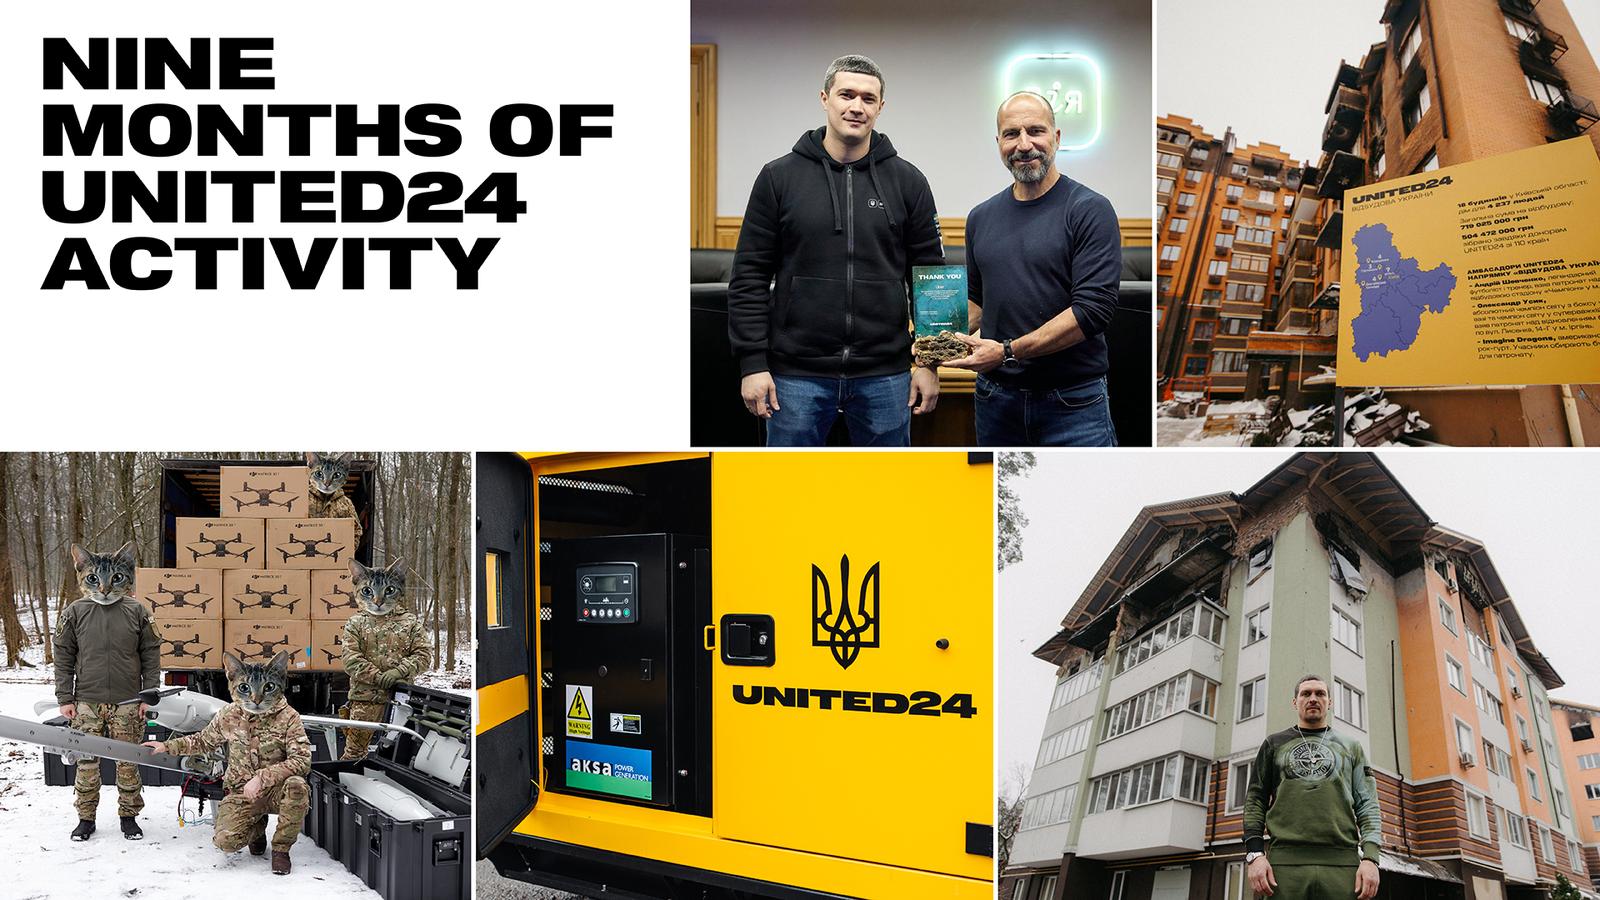 The UNITED24 Fundraising Platform Turns 9 Months Ald: Launch of the Rebuild Ukraine Direction of Support, New Ambassador and The of "Shahed Hunters"